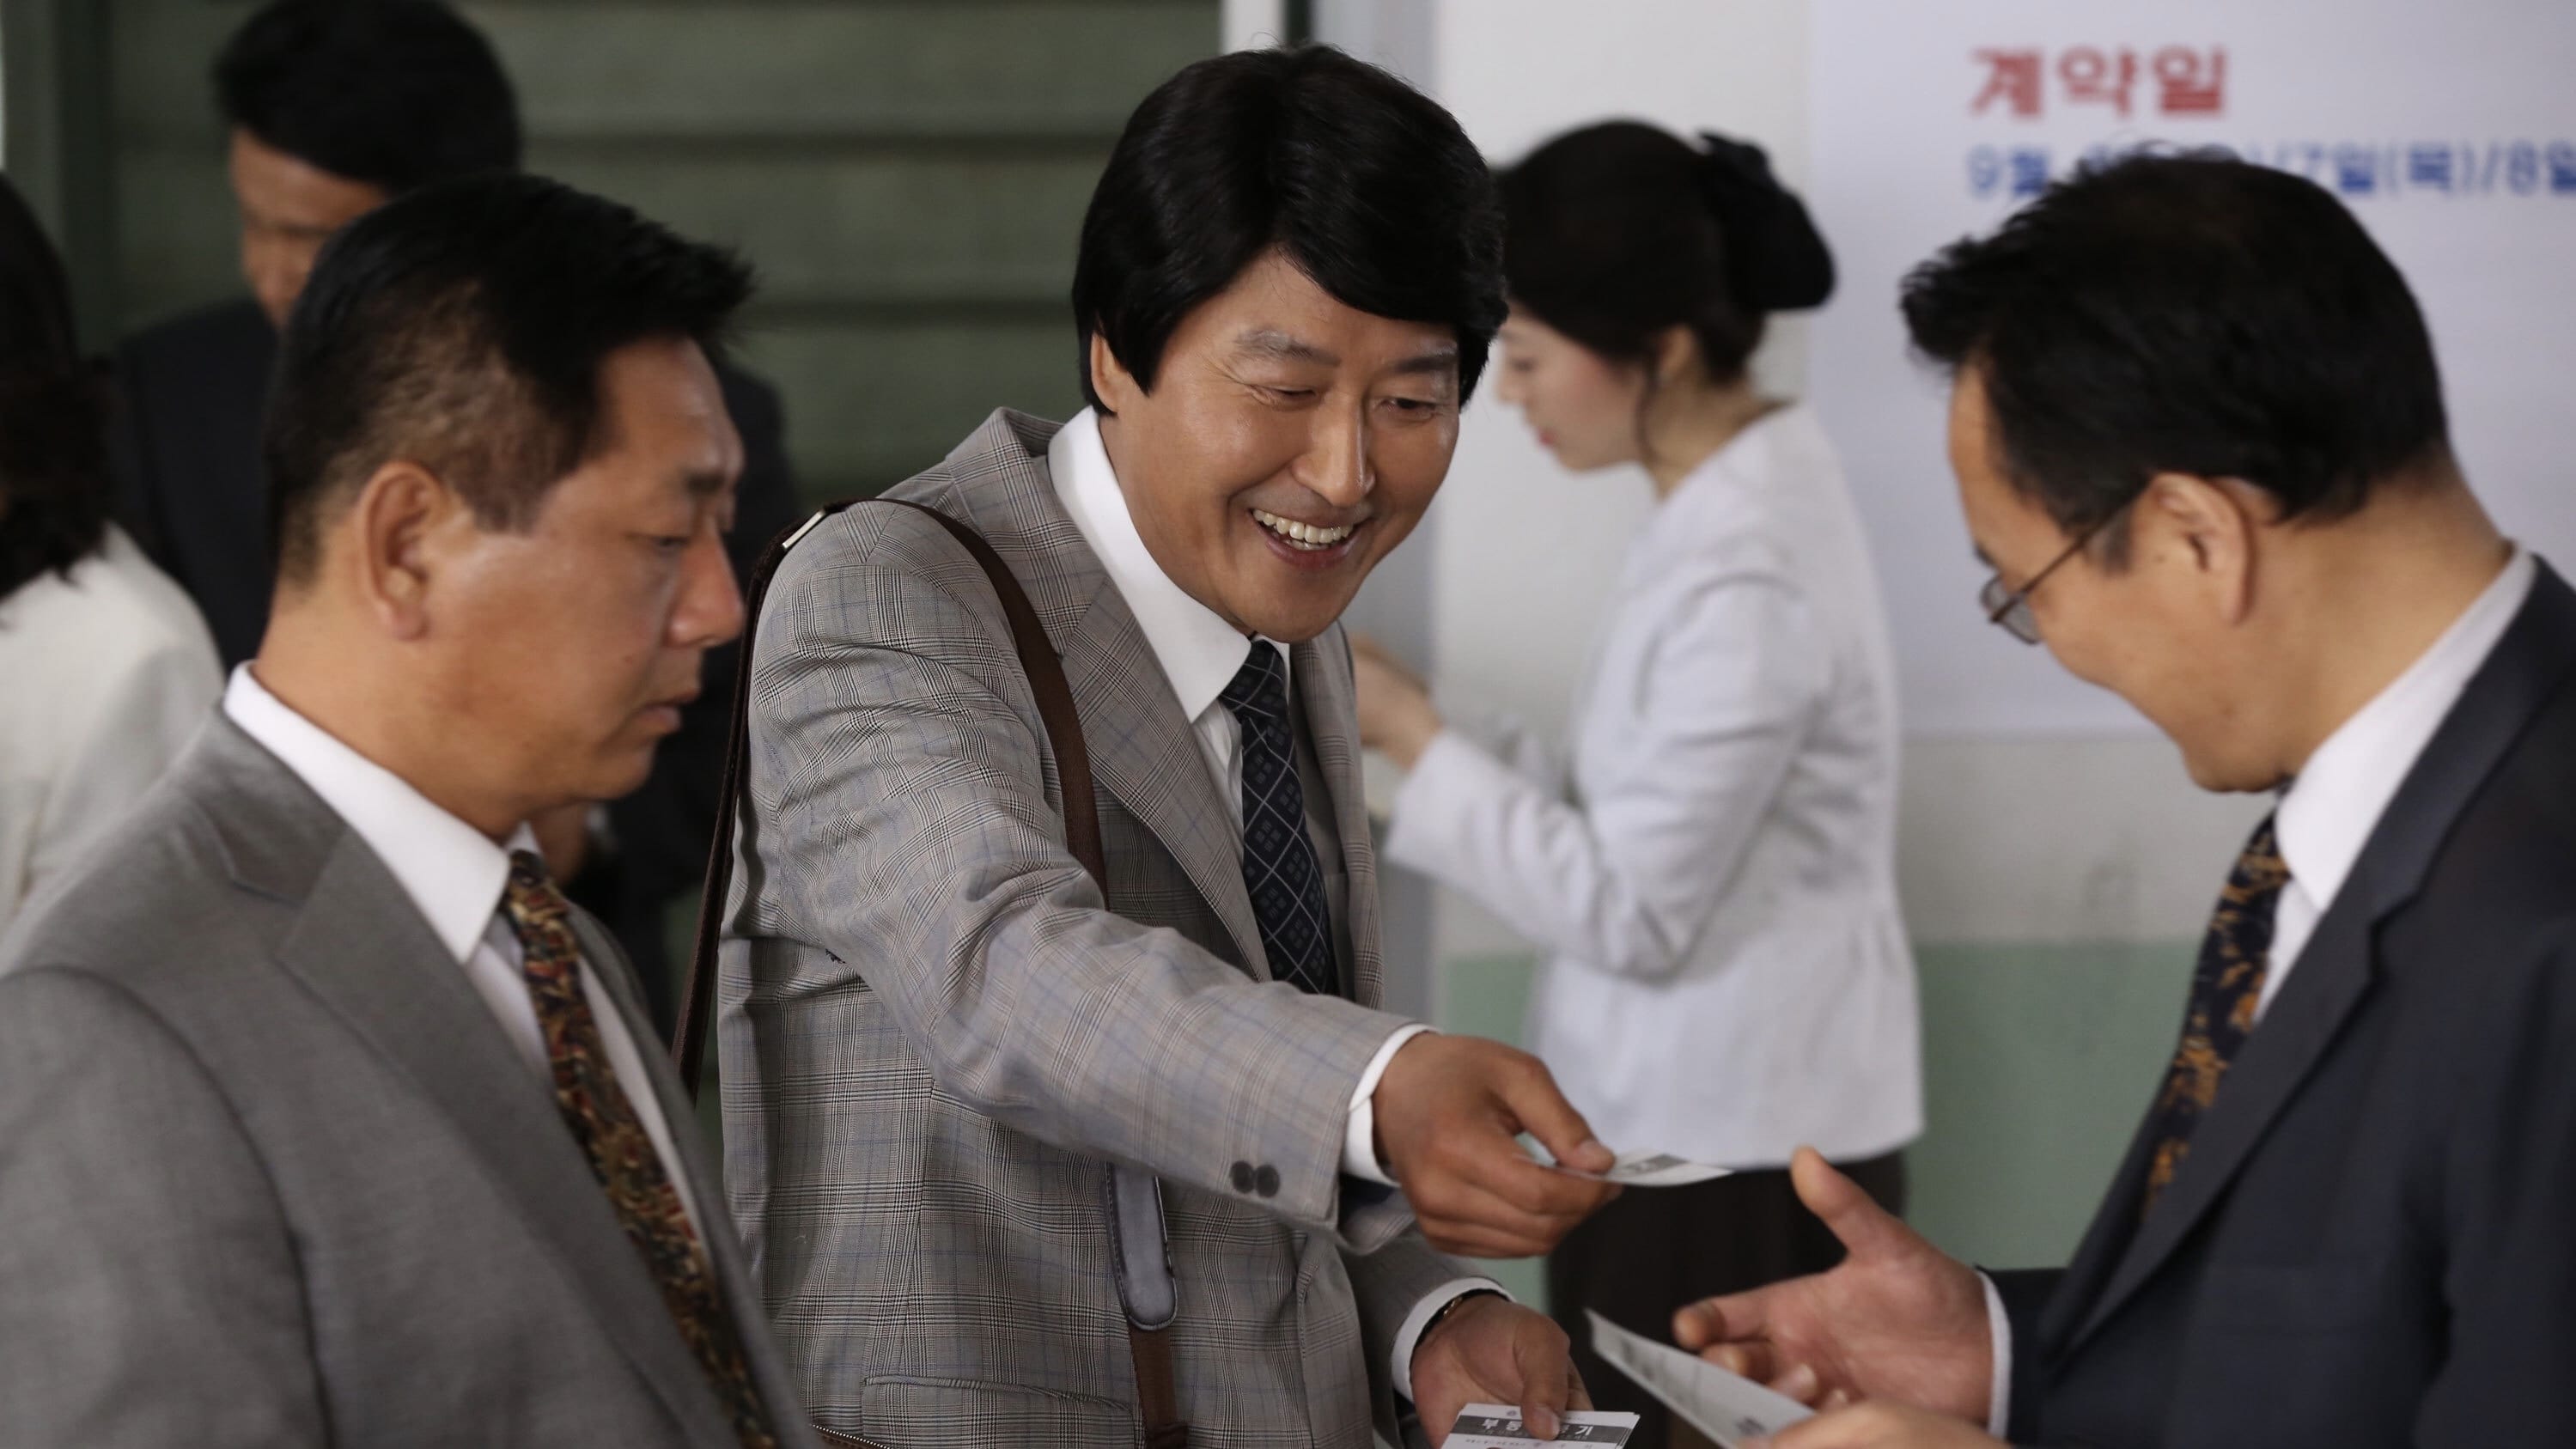 Politics Crime Based on True History Kang-ho Song Lawyers Courtroom Trials